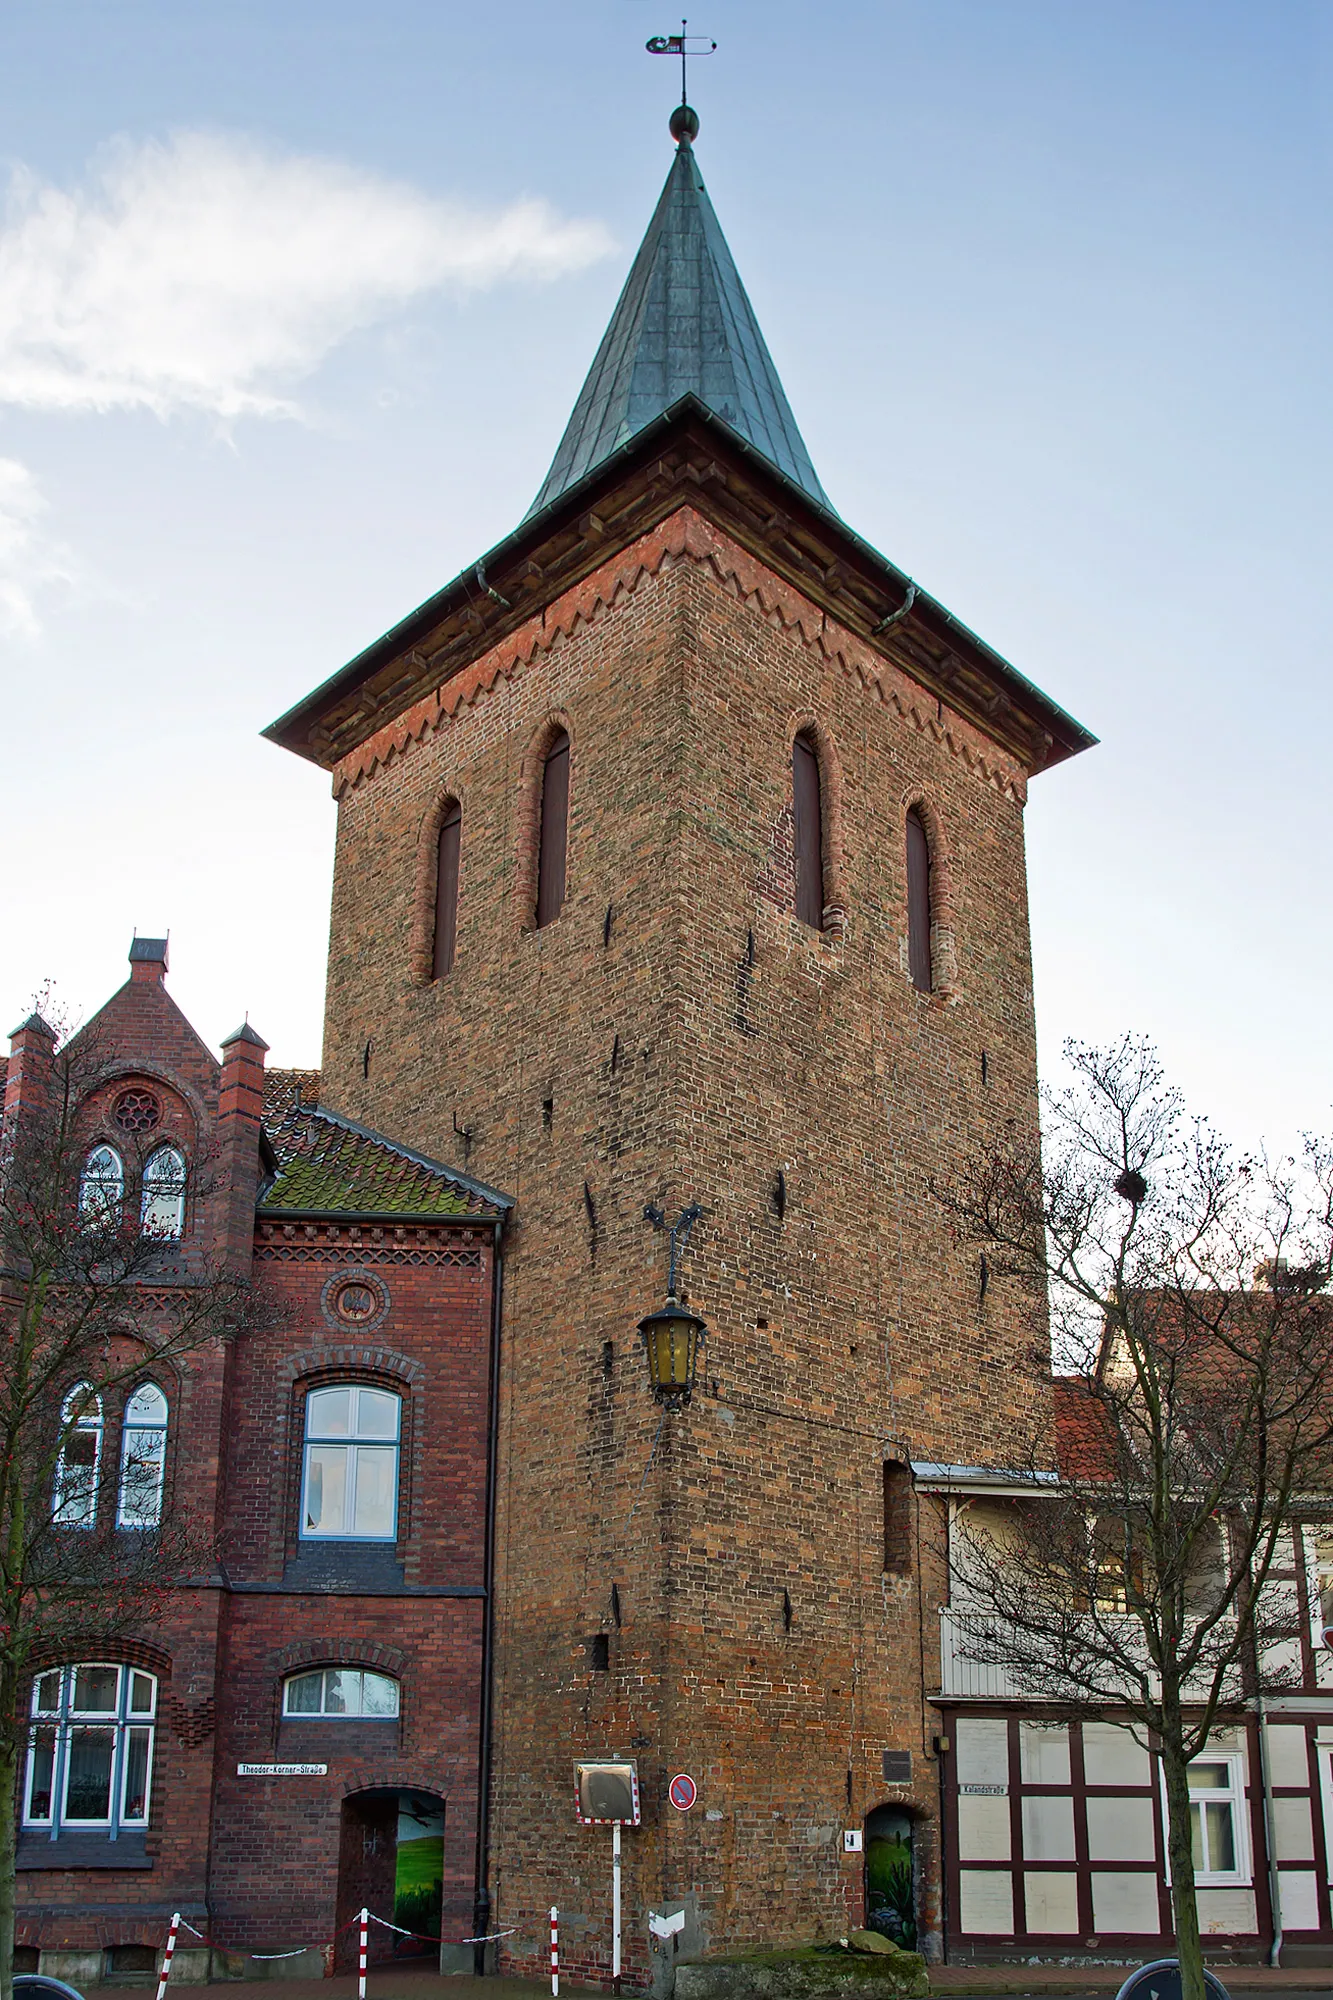 Photo showing: Tower "Glockenturm" in the small town Lüchow (district Lüchow-Dannenberg, northern Germany).